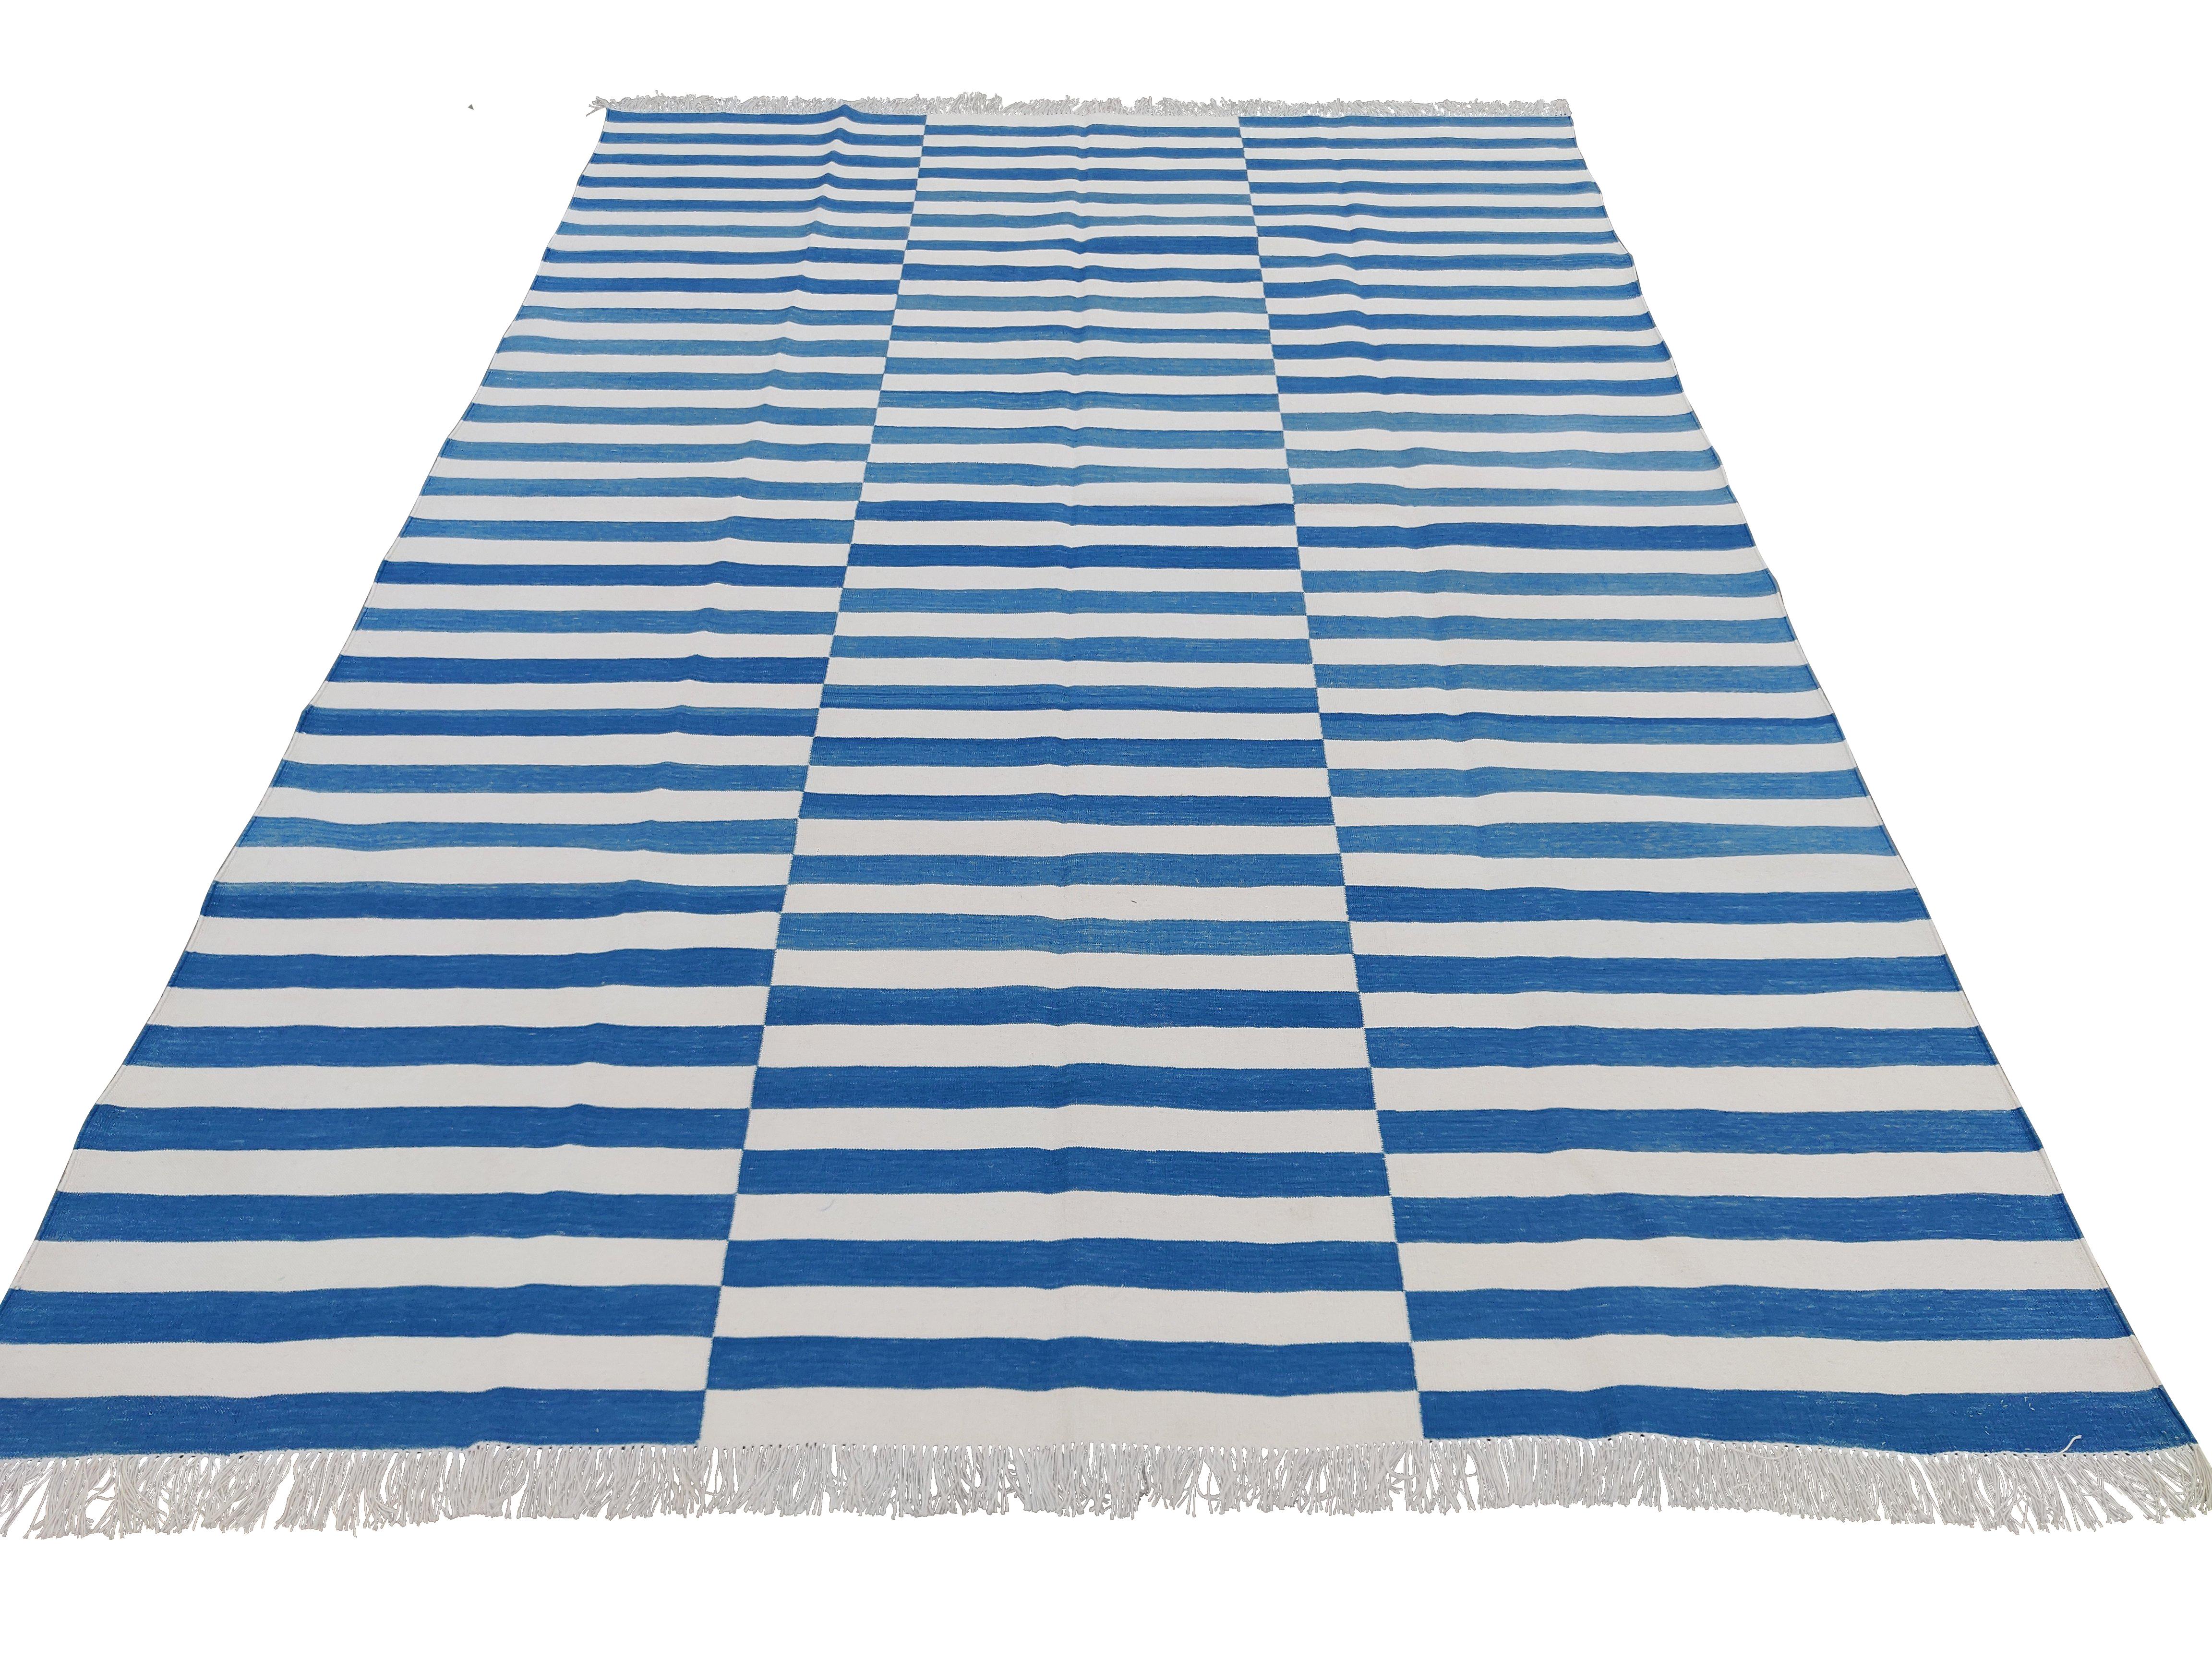 Hand-Woven Handmade Cotton Area Flat Weave Rug, Blue And White Striped Indian Dhurrie Rug For Sale